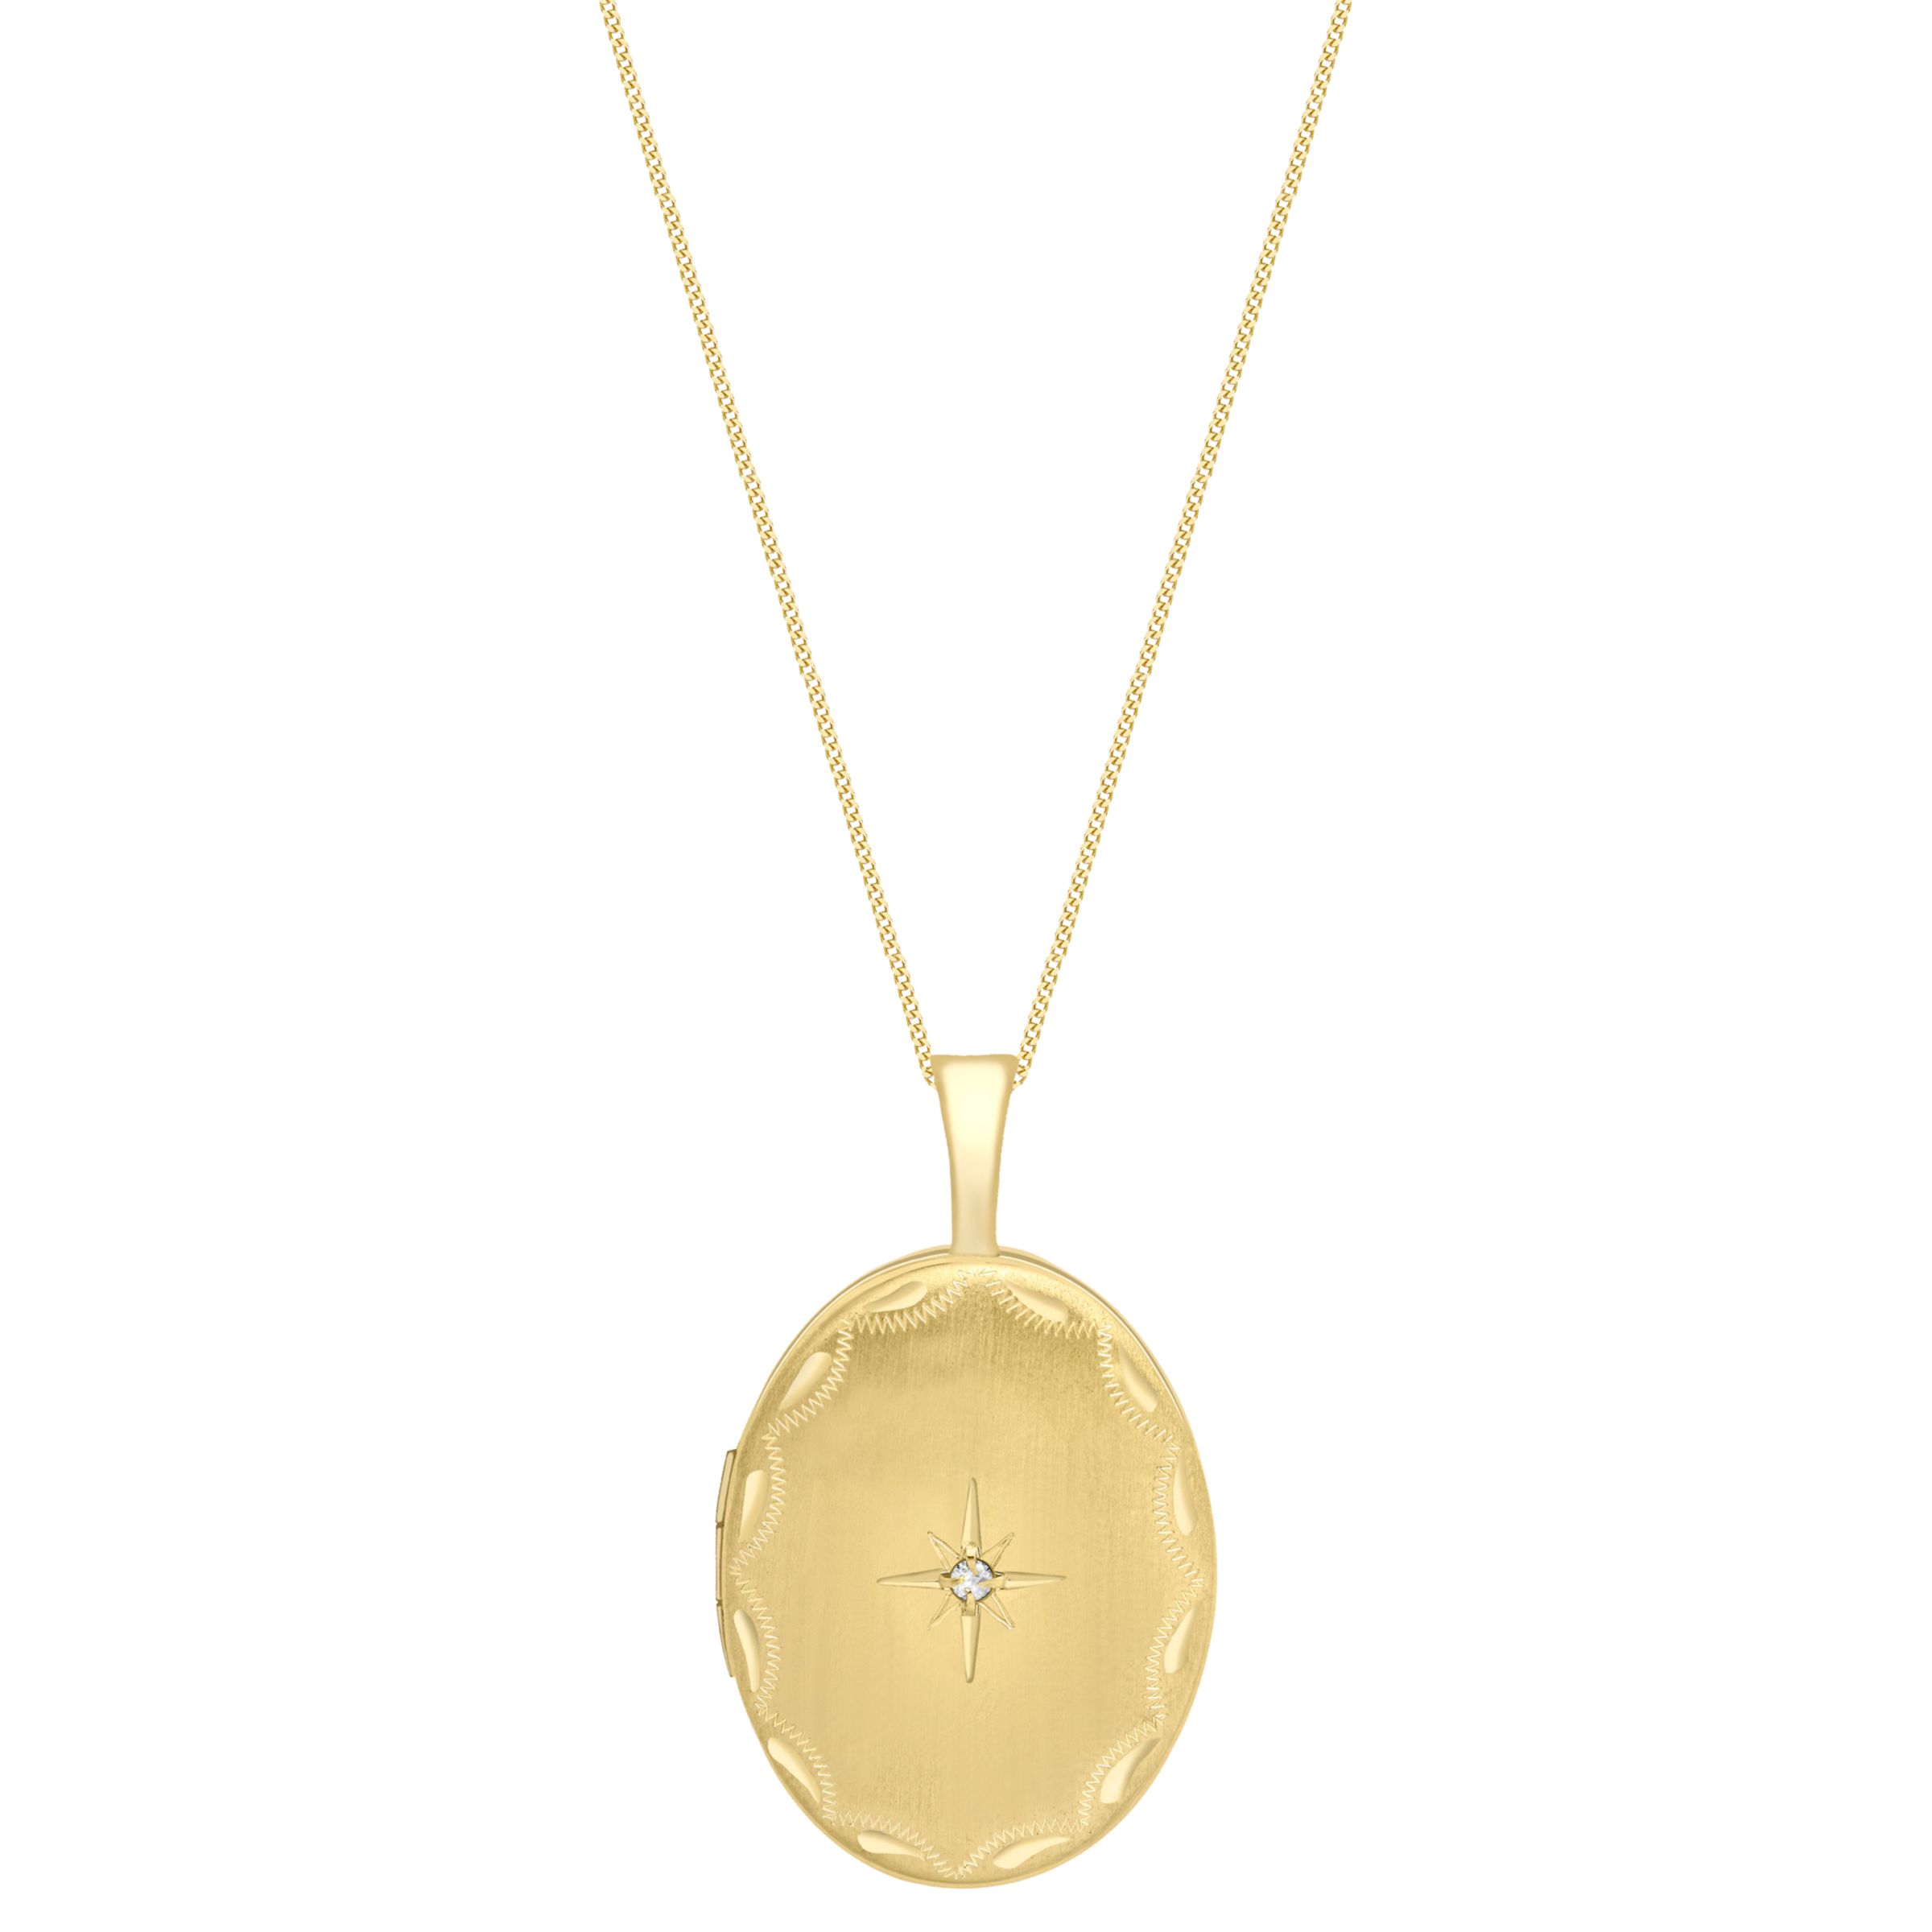 IBB 9ct Gold Oval Locket Pendant Necklace, Gold